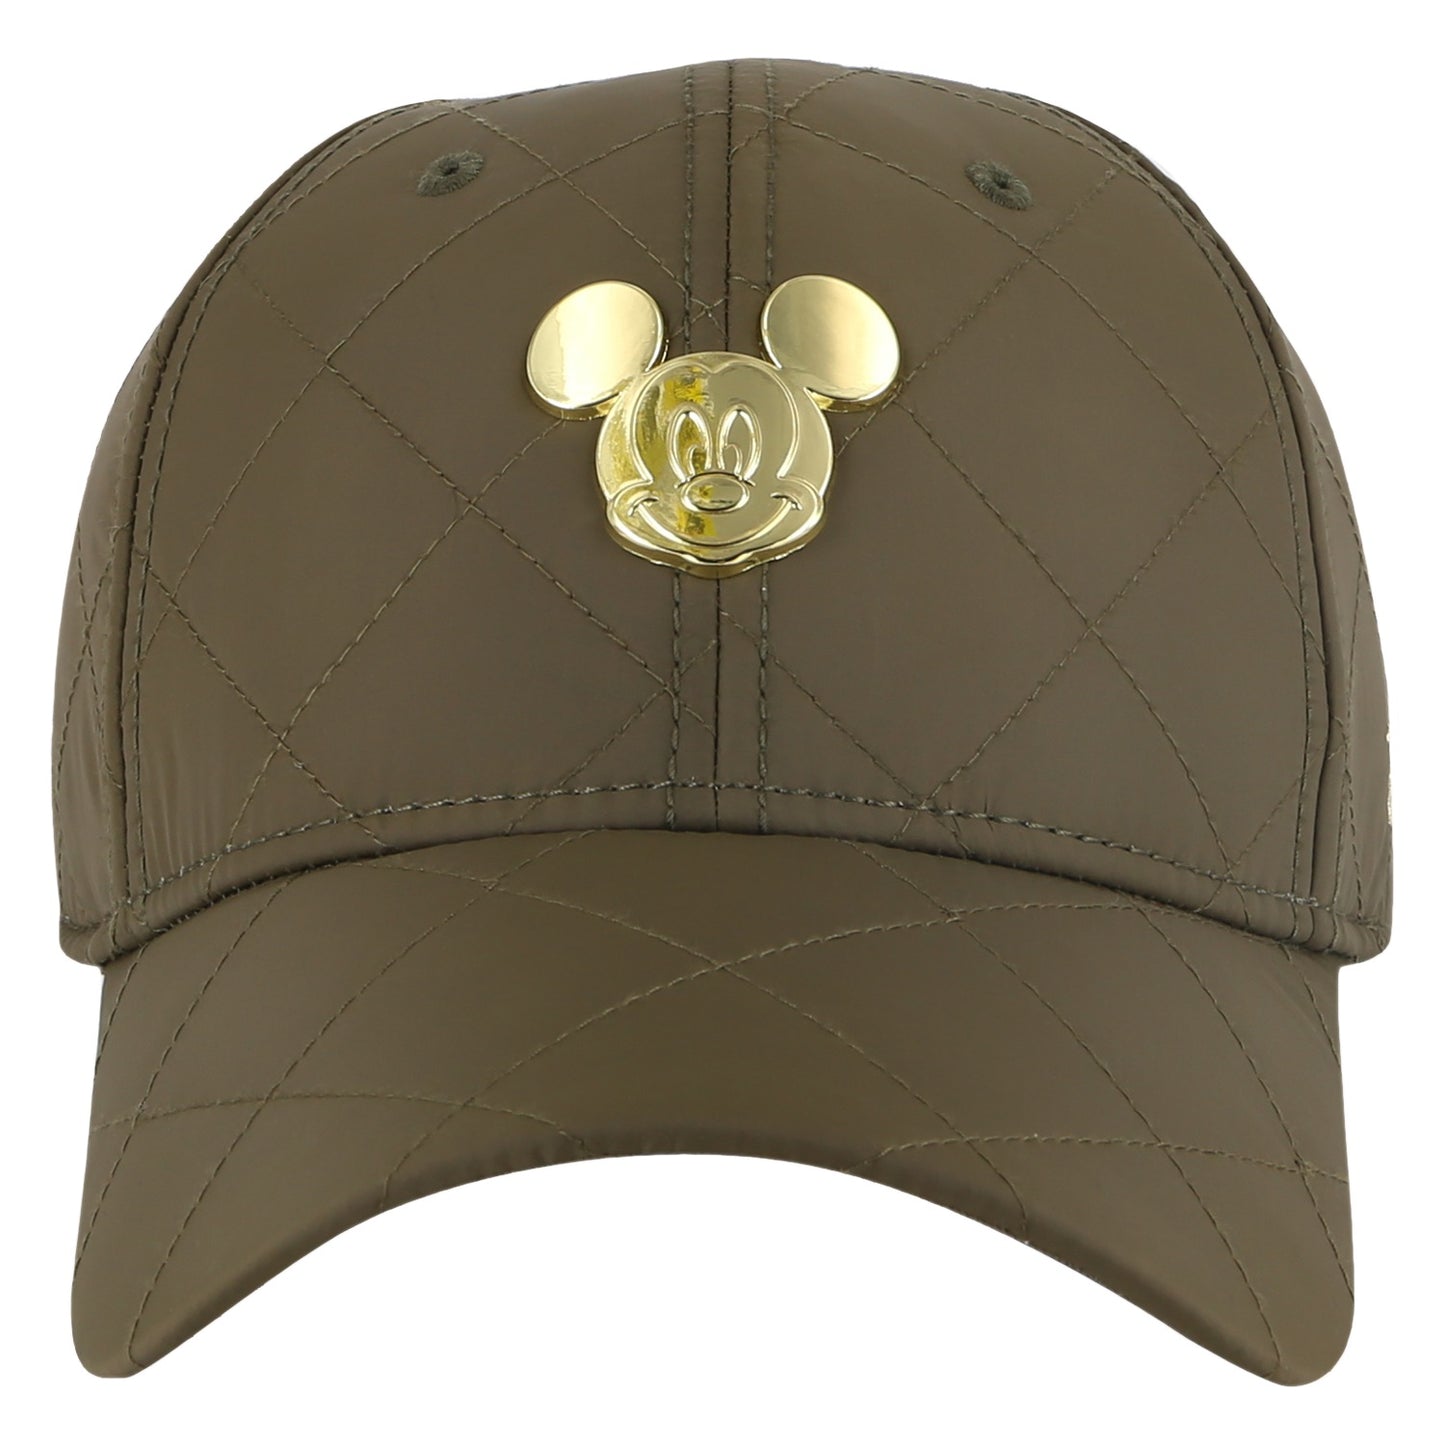 Quilted Mickey Mouse Baseball Cap in Yellow